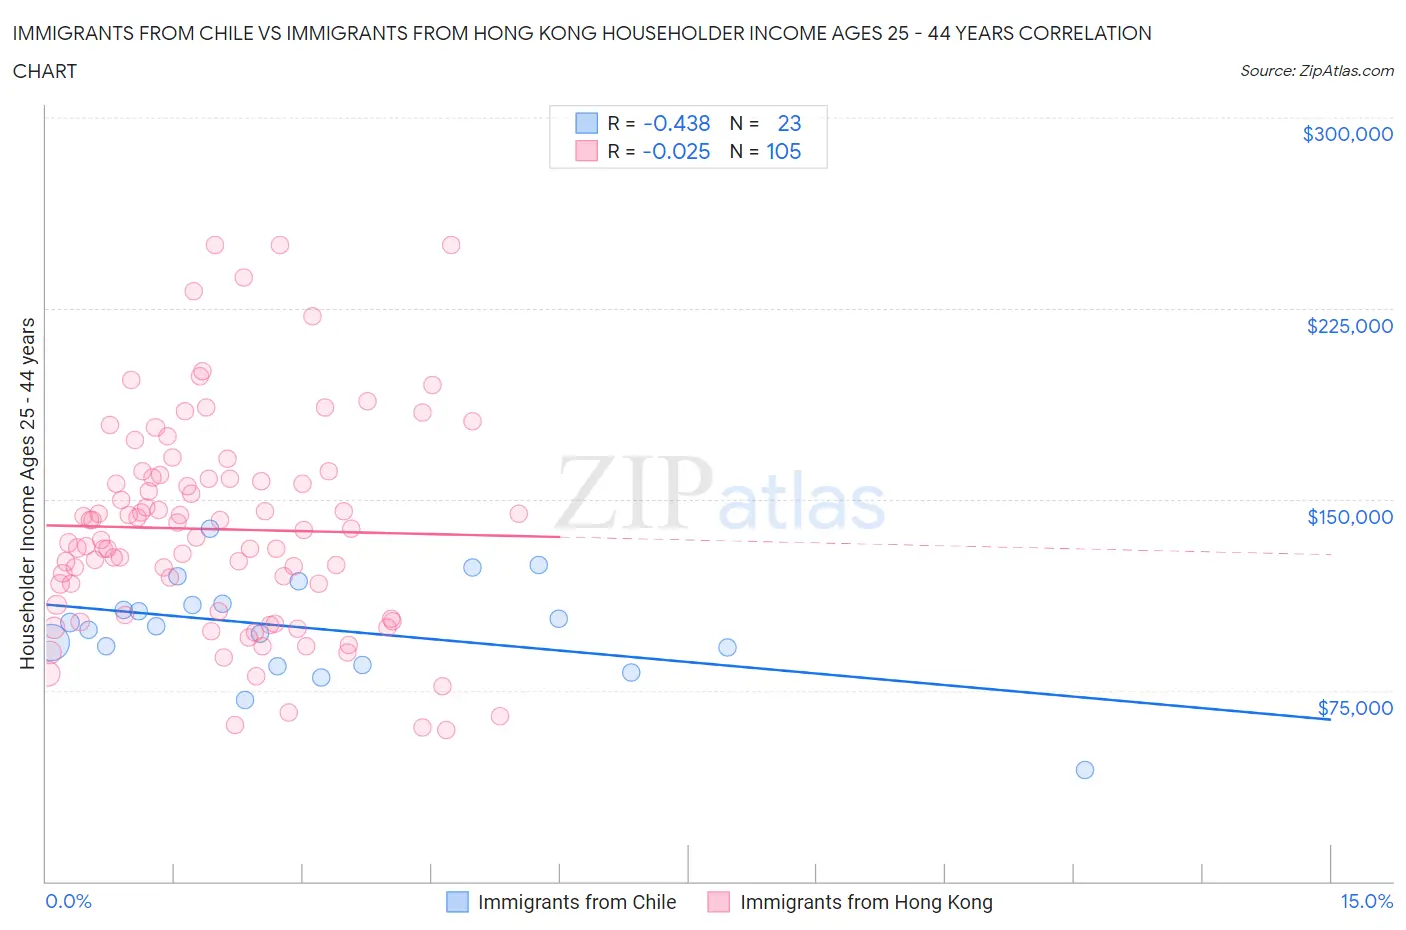 Immigrants from Chile vs Immigrants from Hong Kong Householder Income Ages 25 - 44 years